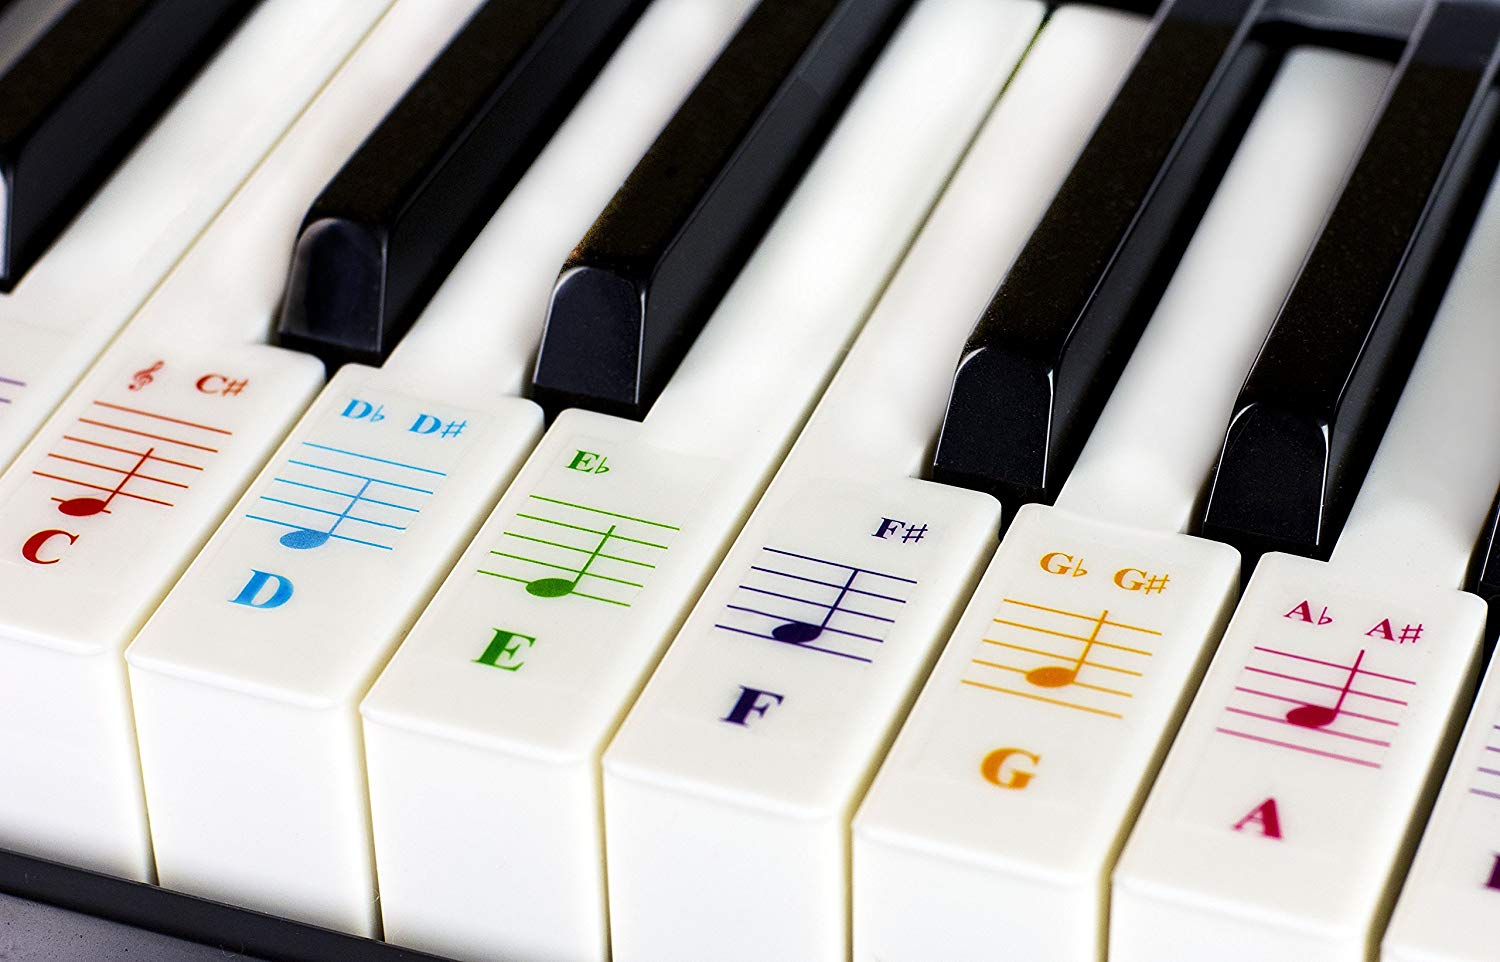 76/88 Keyboards Piano Stickers for Keys Removable w/Double Layer Coating for 49/61 